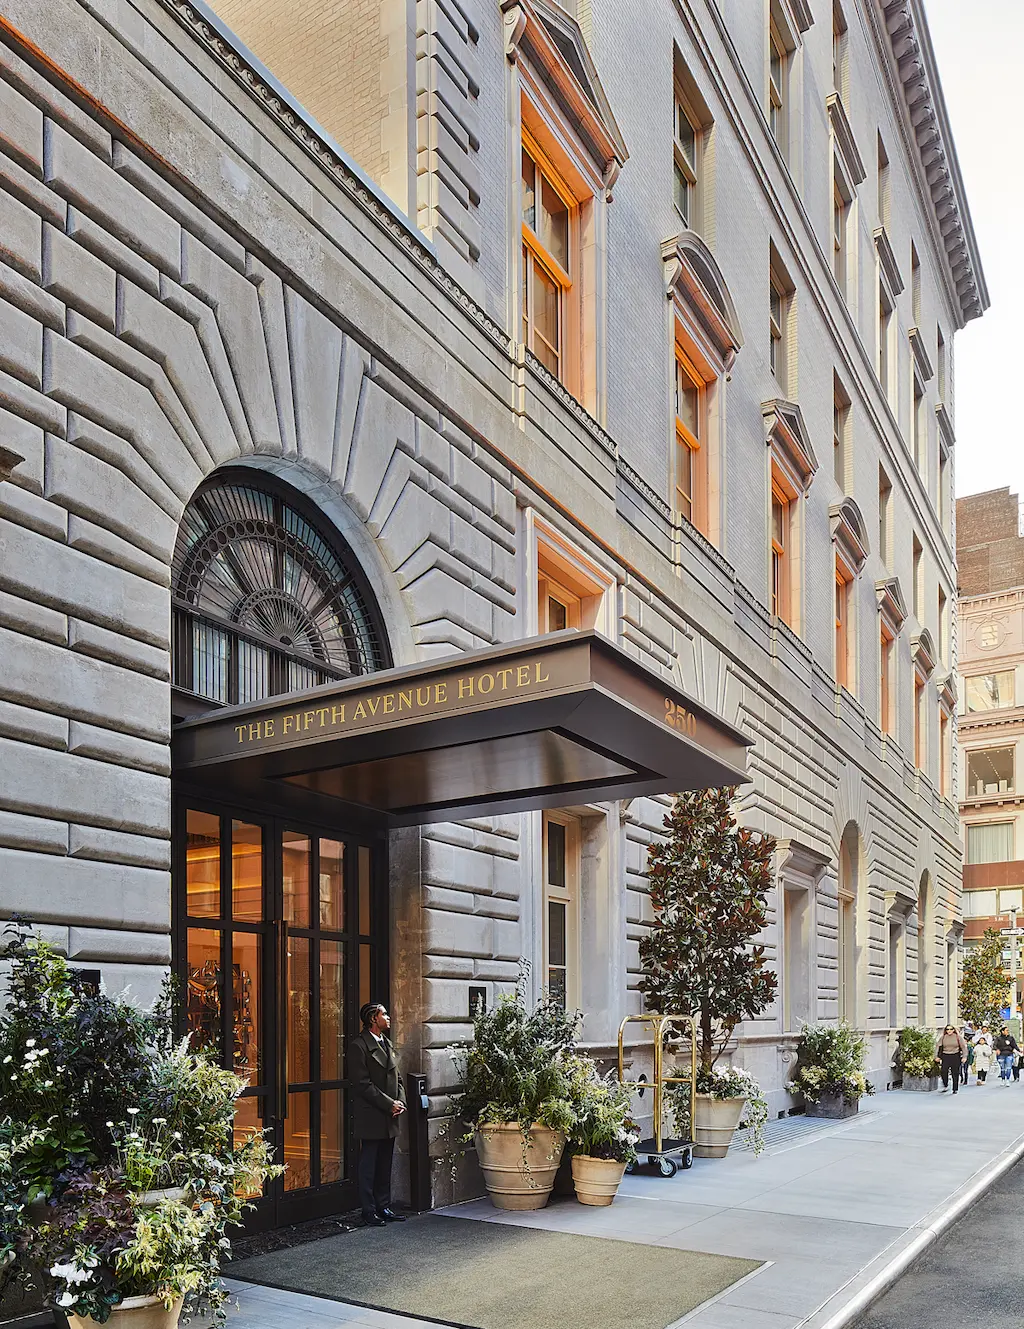 The Fifth Ave Hotel's exterior looks amazing with its stunning architectural design.